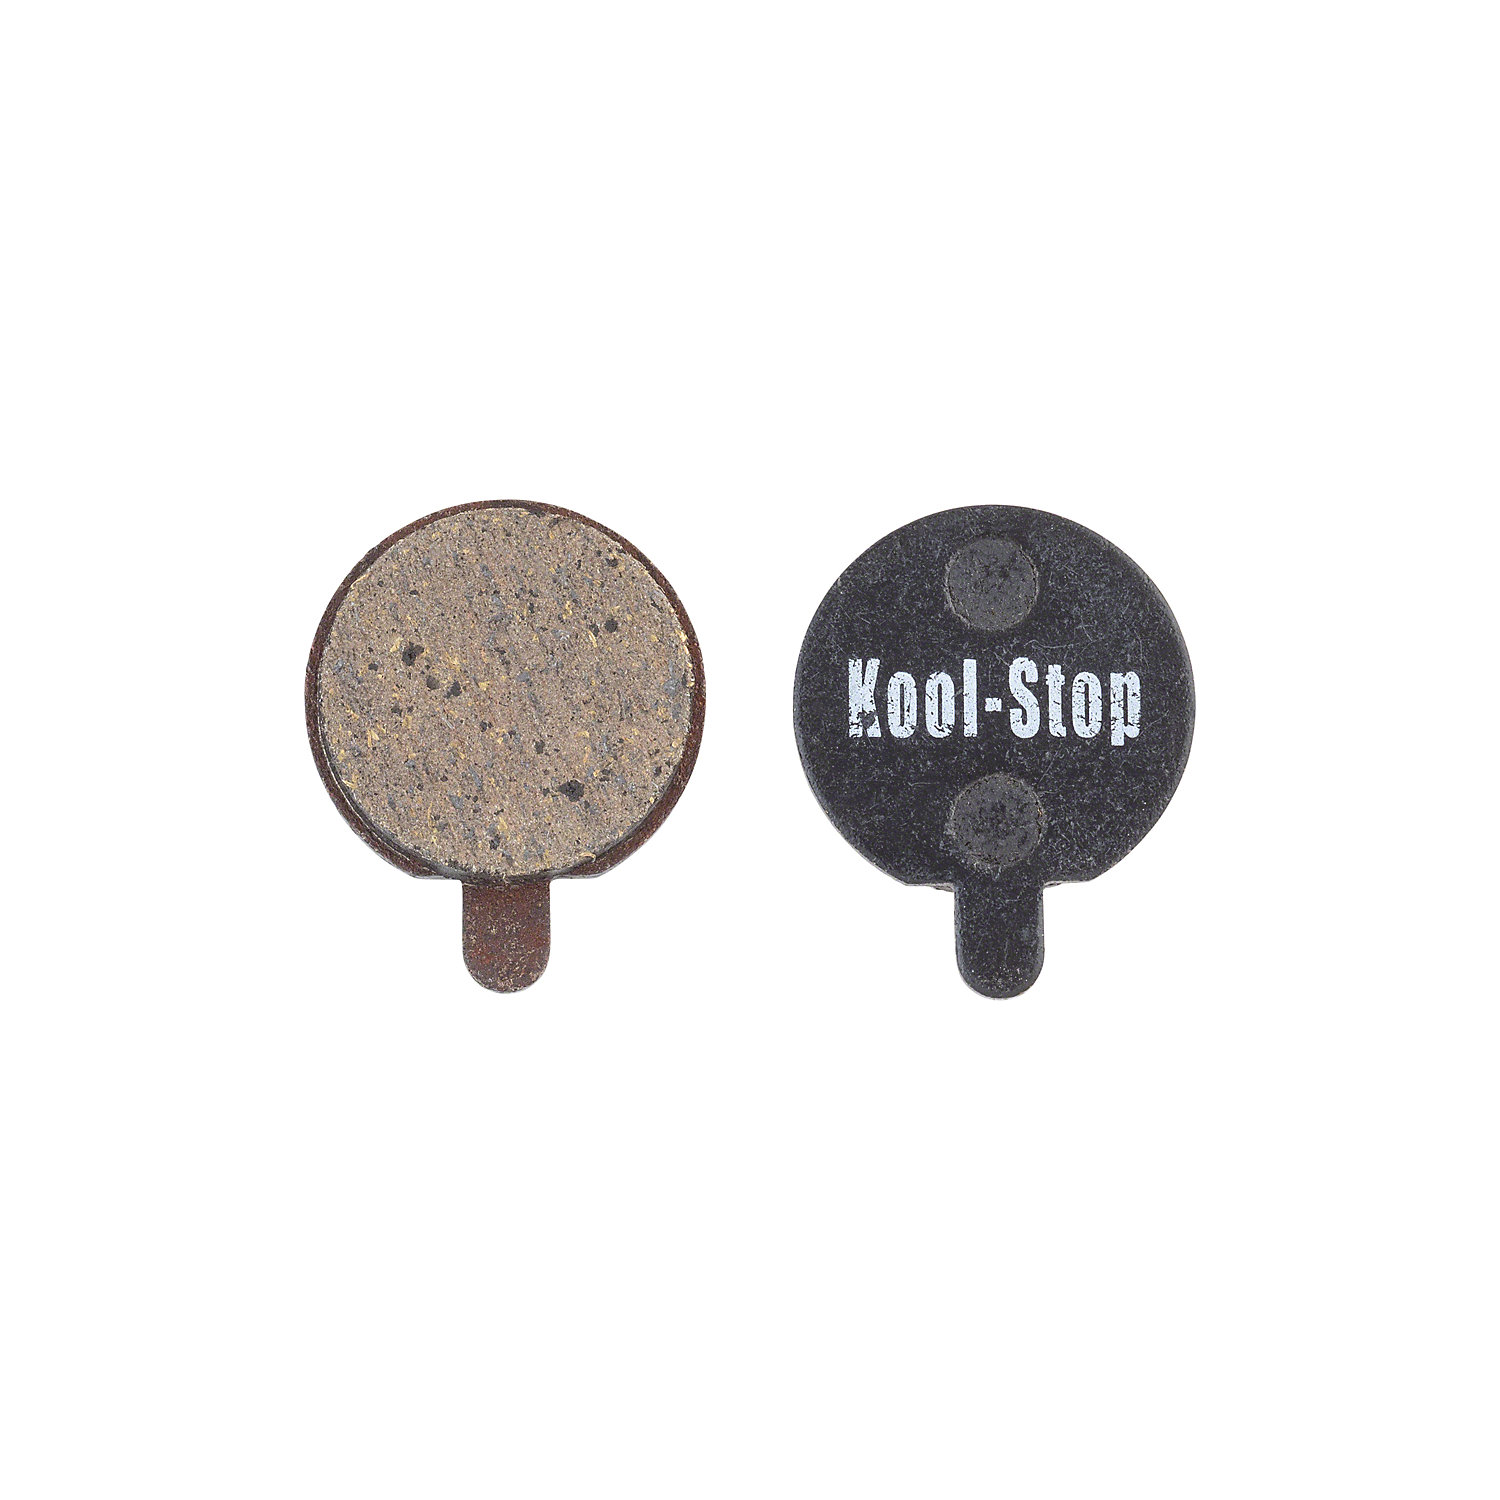 Kool-Stop Disc Brake Pads for Zoom - Organic Compound